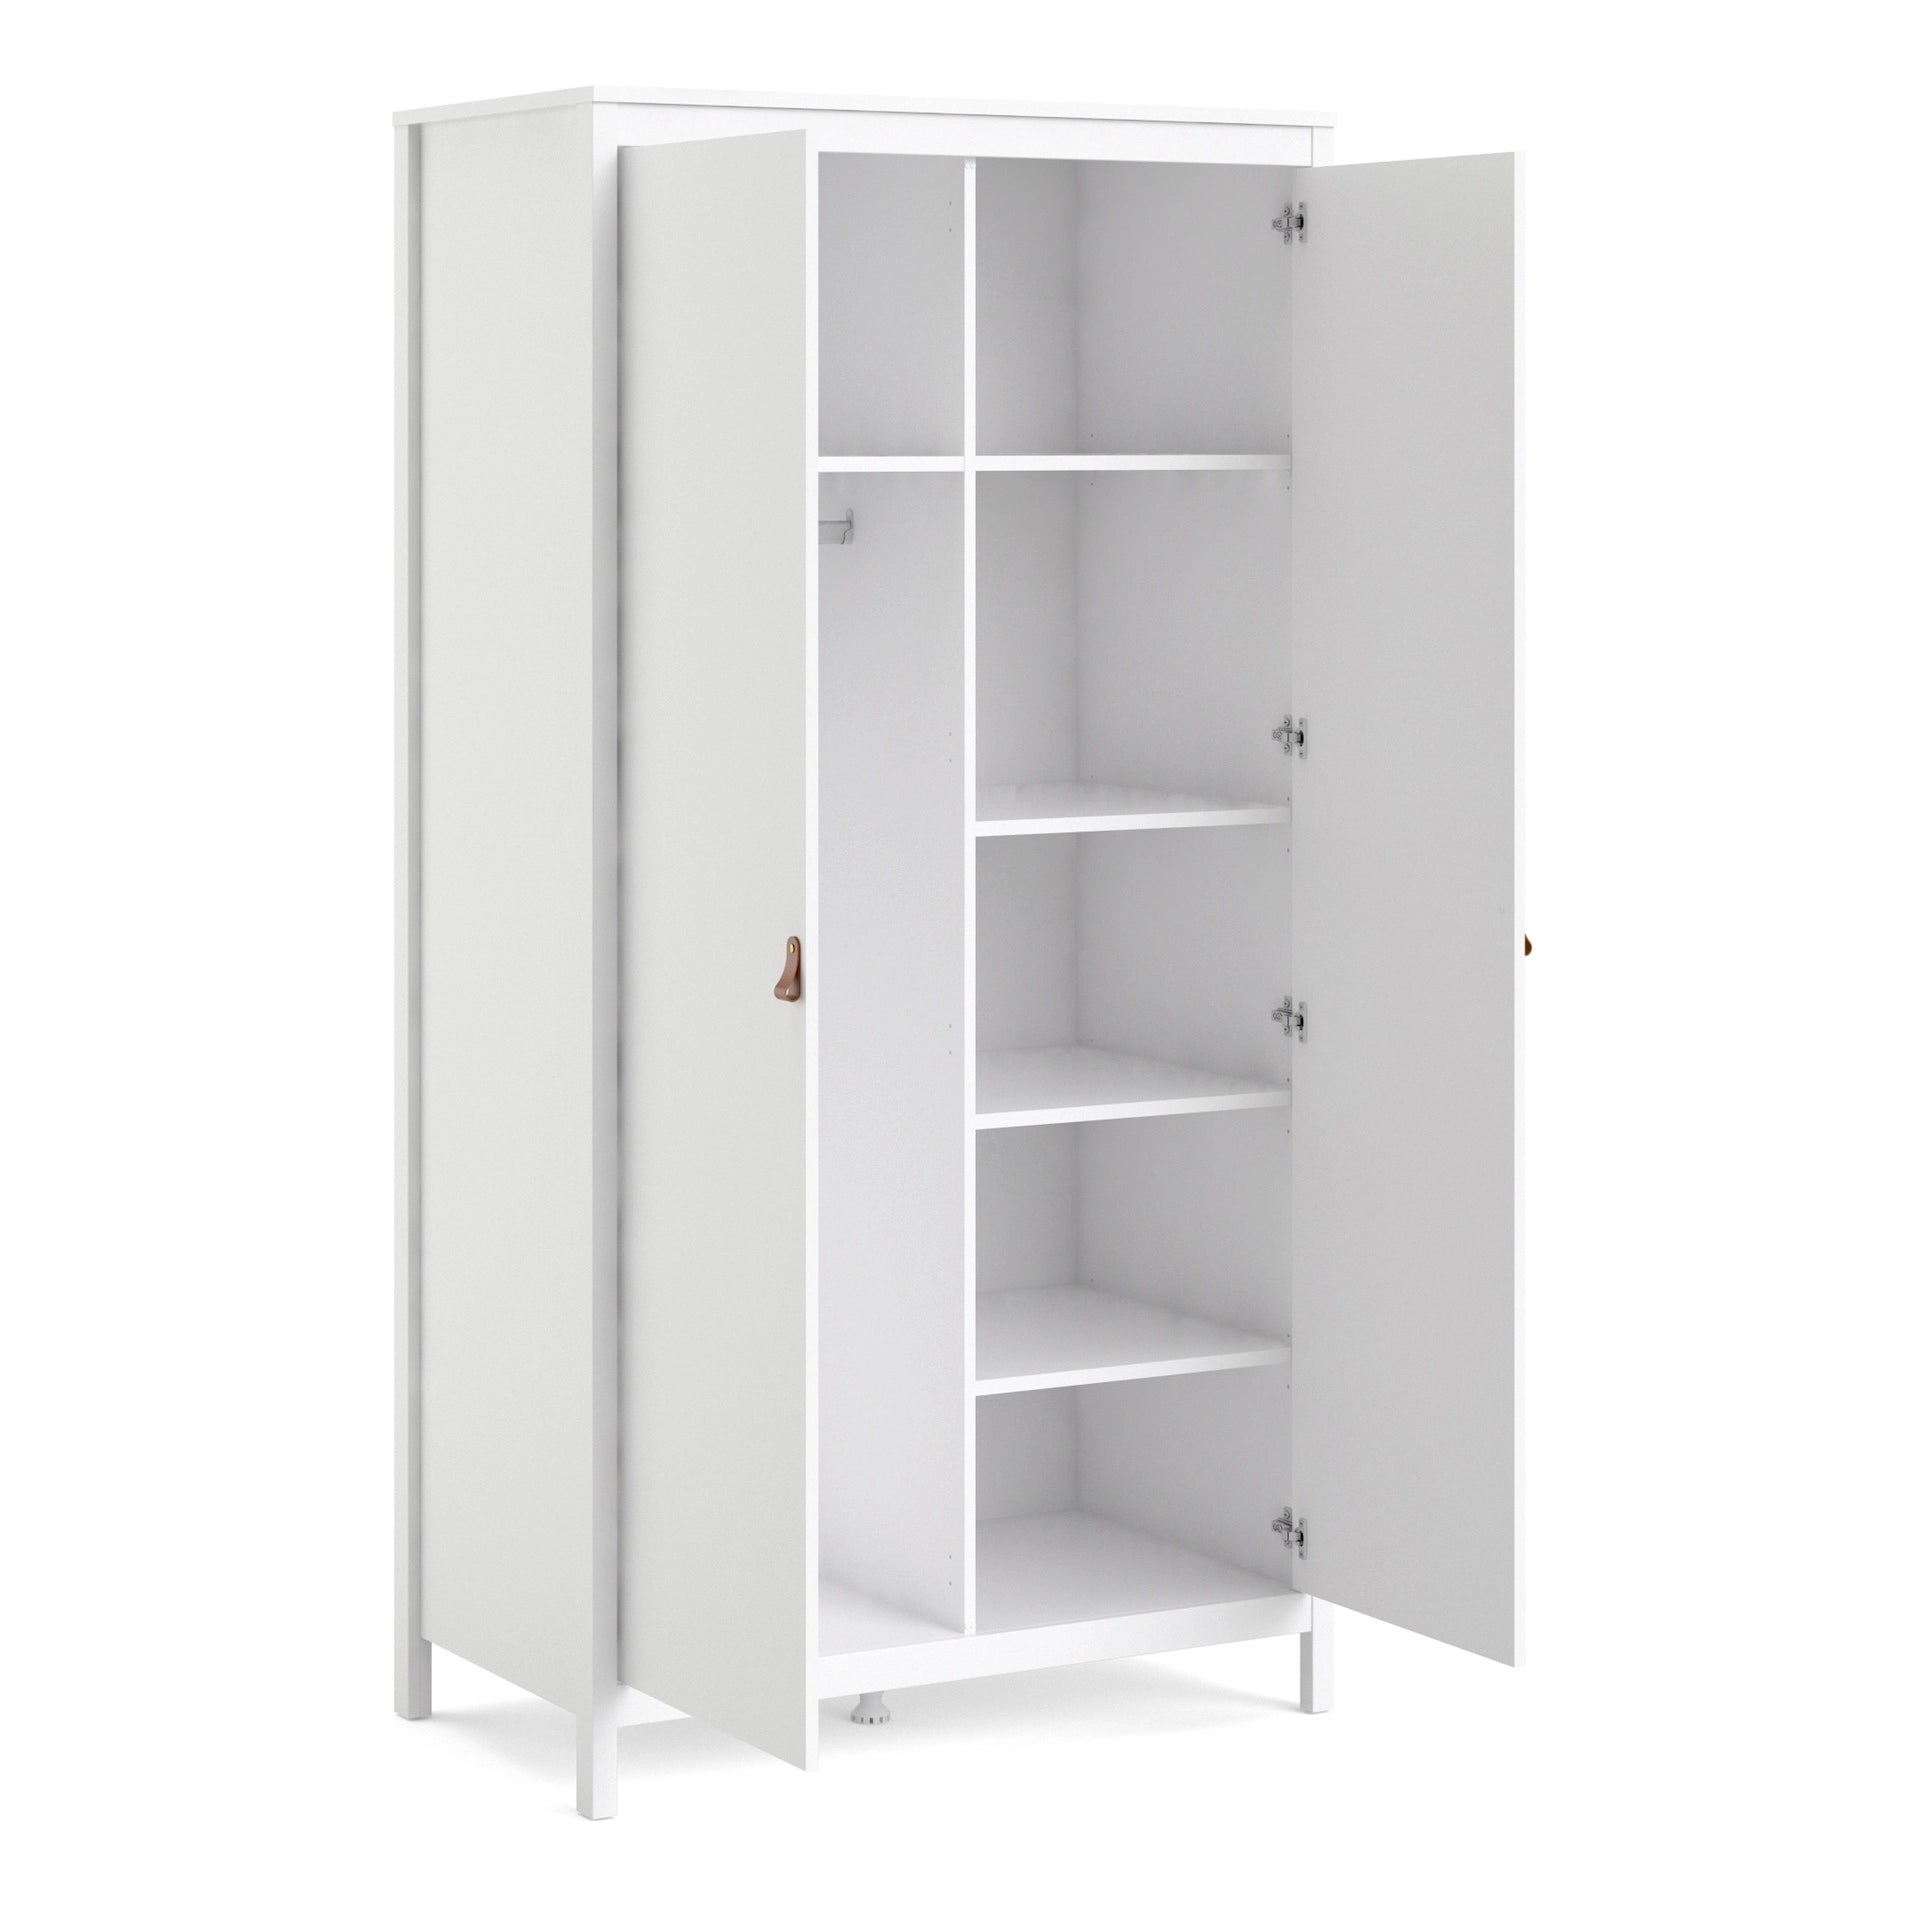 Furniture To Go Barcelona Wardrobe with 2 Doors in White